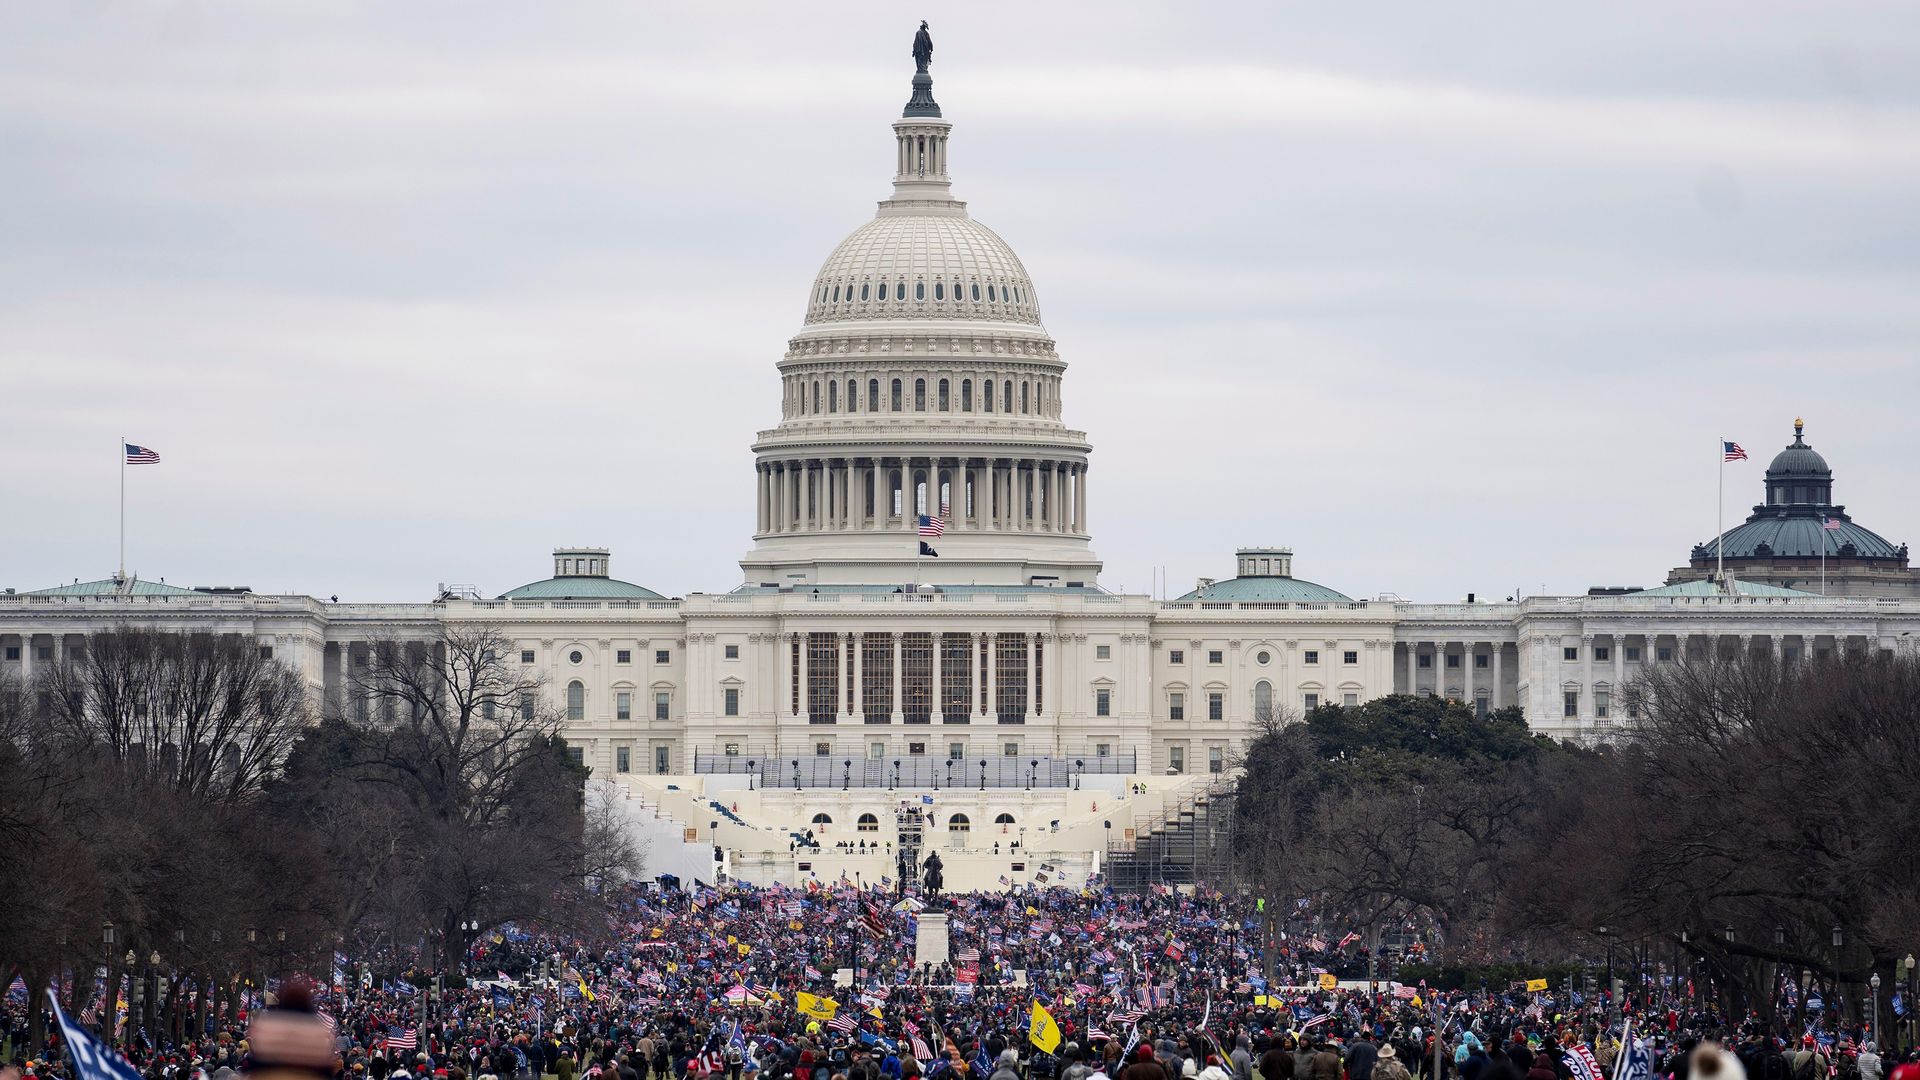 Supporters of U.S. President Donald Trump gather in front of the U.S. Capitol building in Washington, D.C., the United States on Jan. 6, 2021.